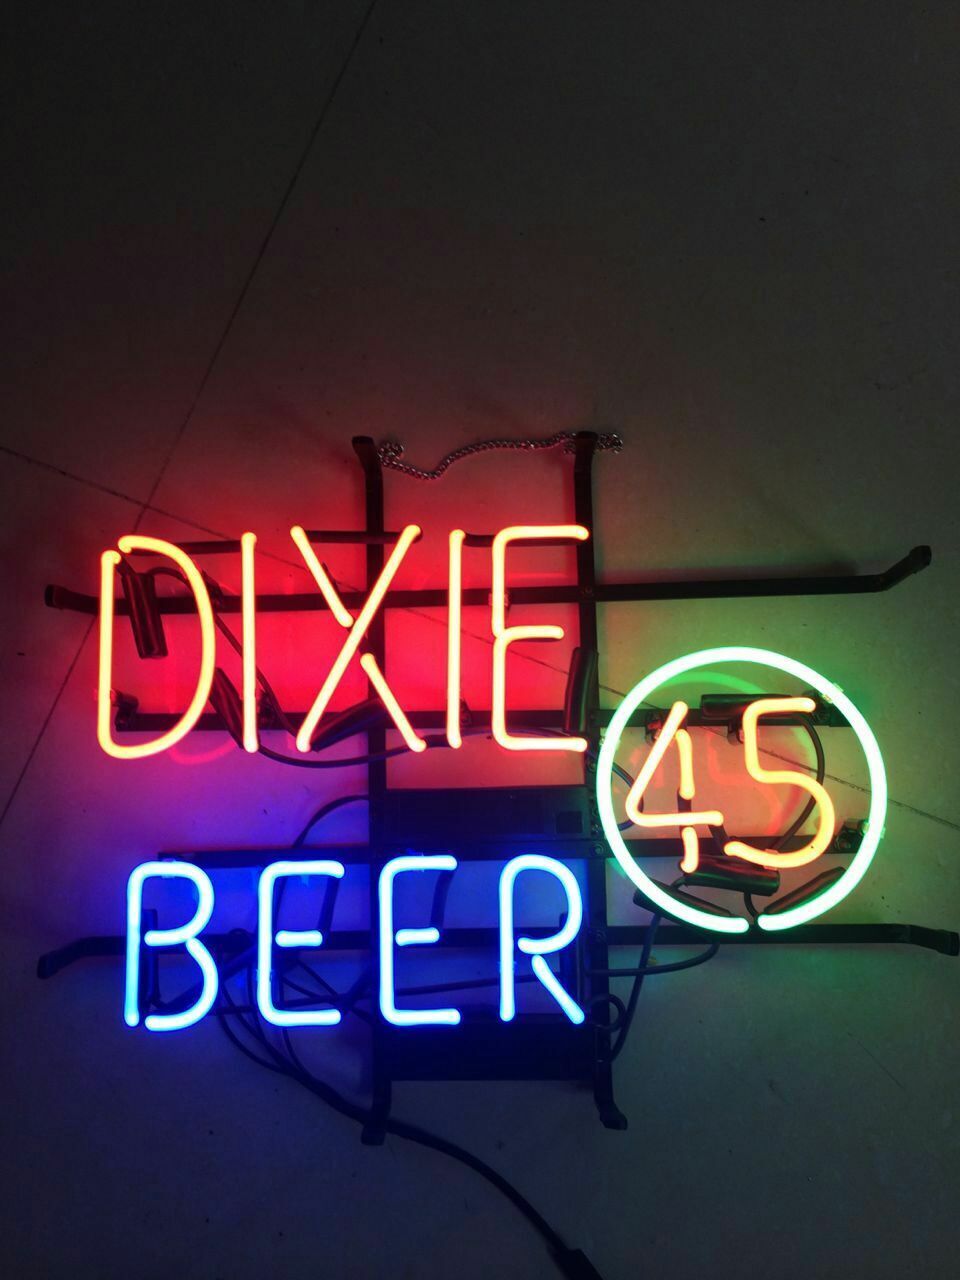 Dixie Beer 45 Real Glass 20\